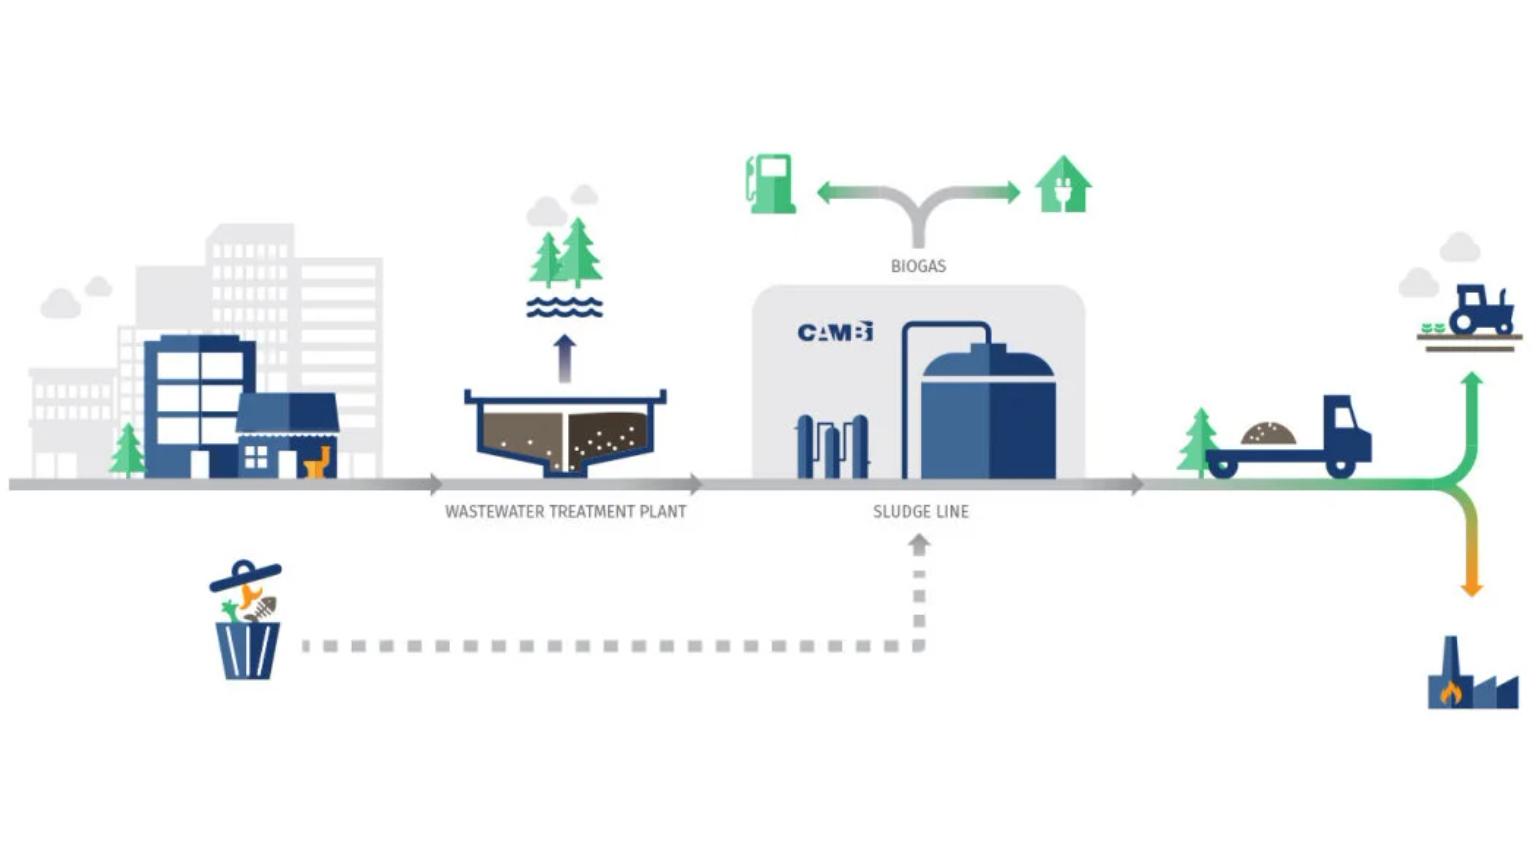 Illustration of a wastewater treatment system